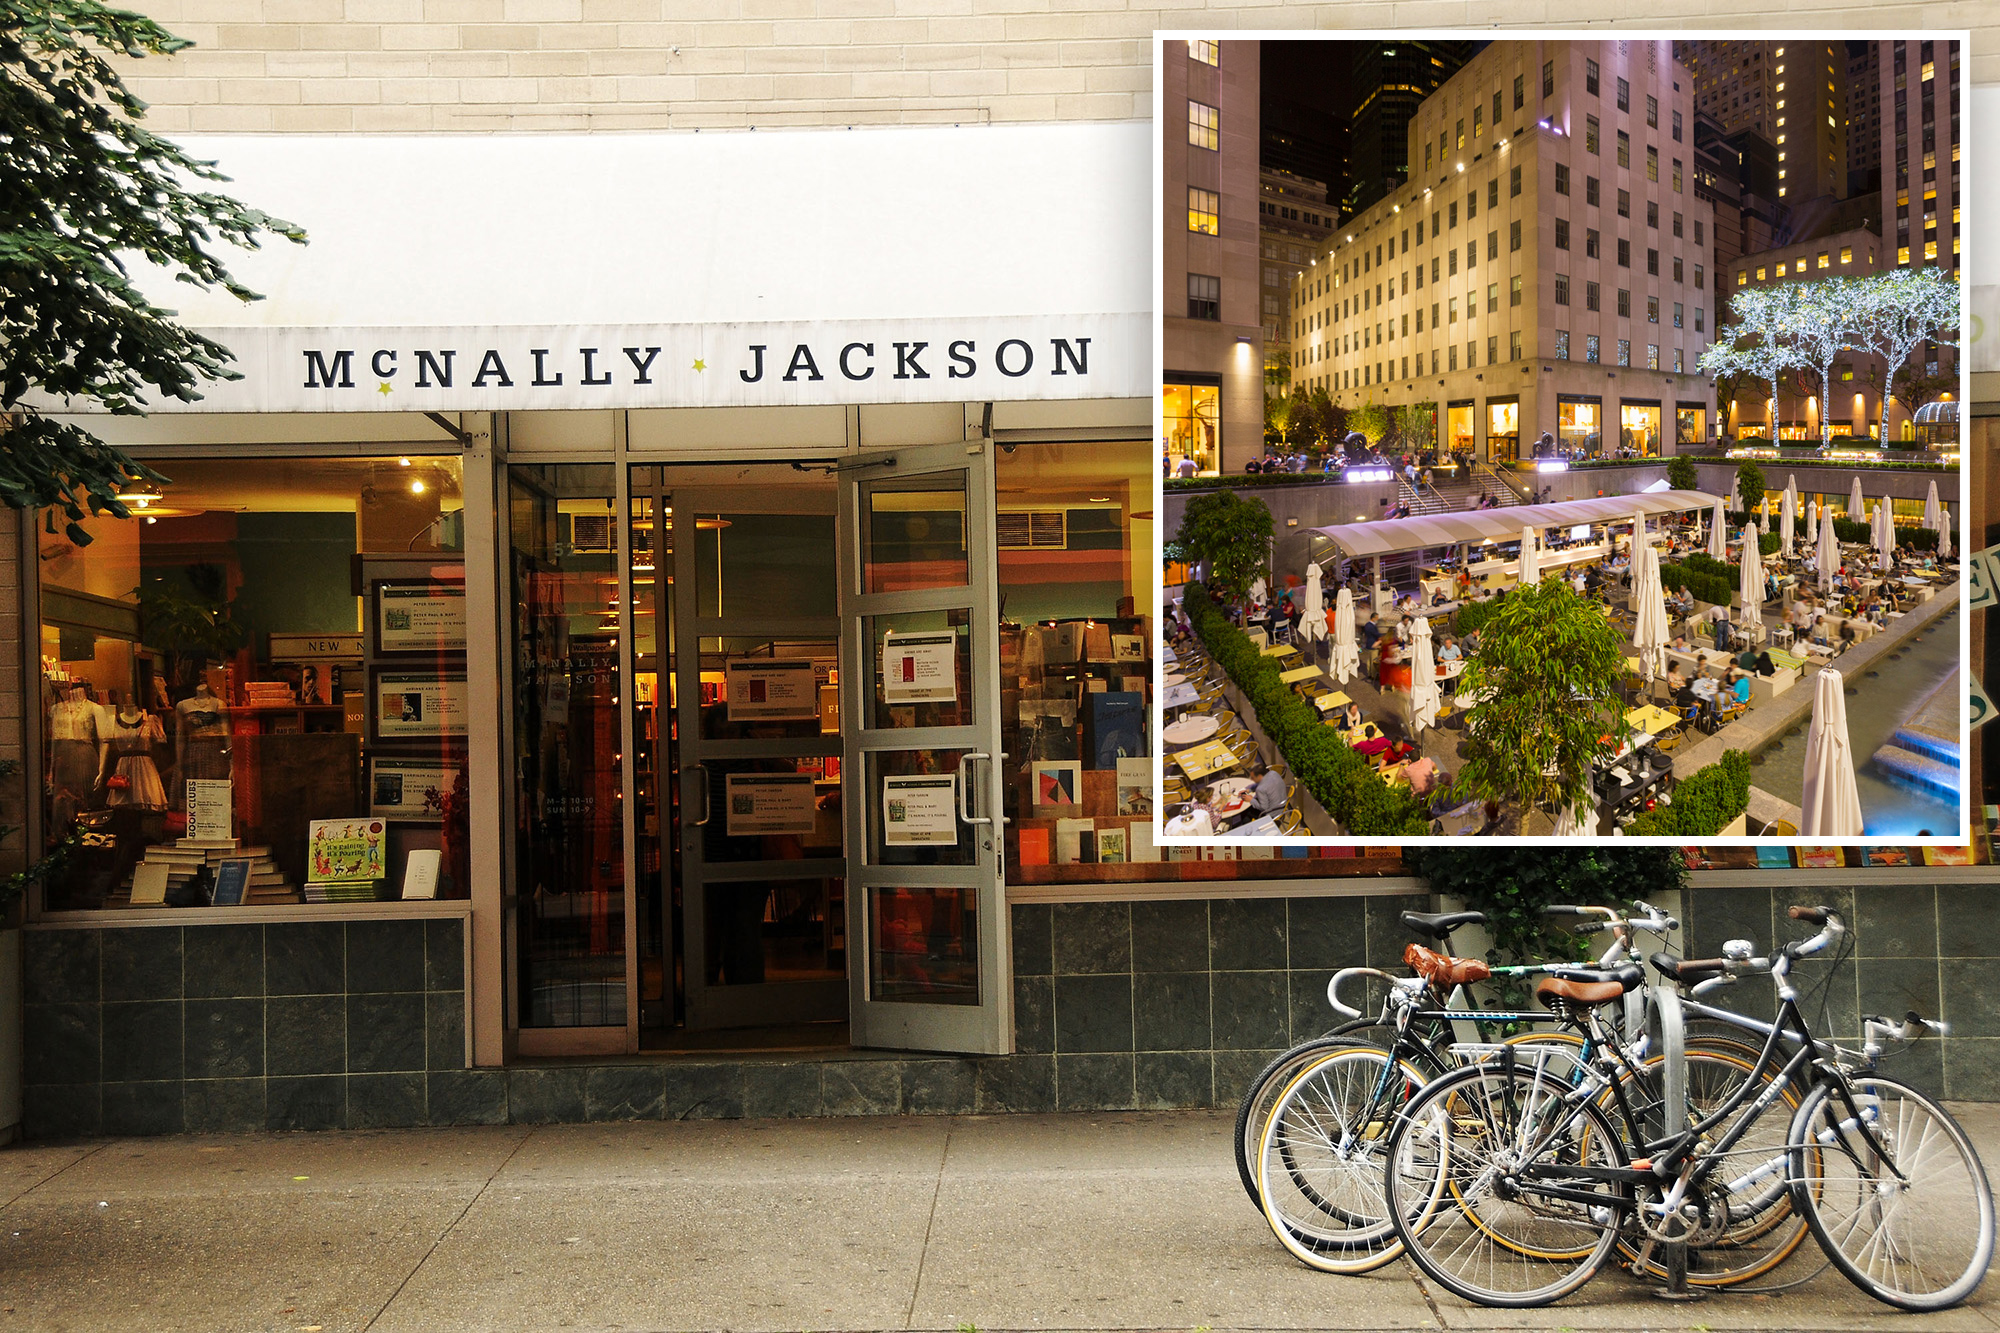 The new McNally Jackson flagship is set to open its doors this winter in a prime Midtown area.